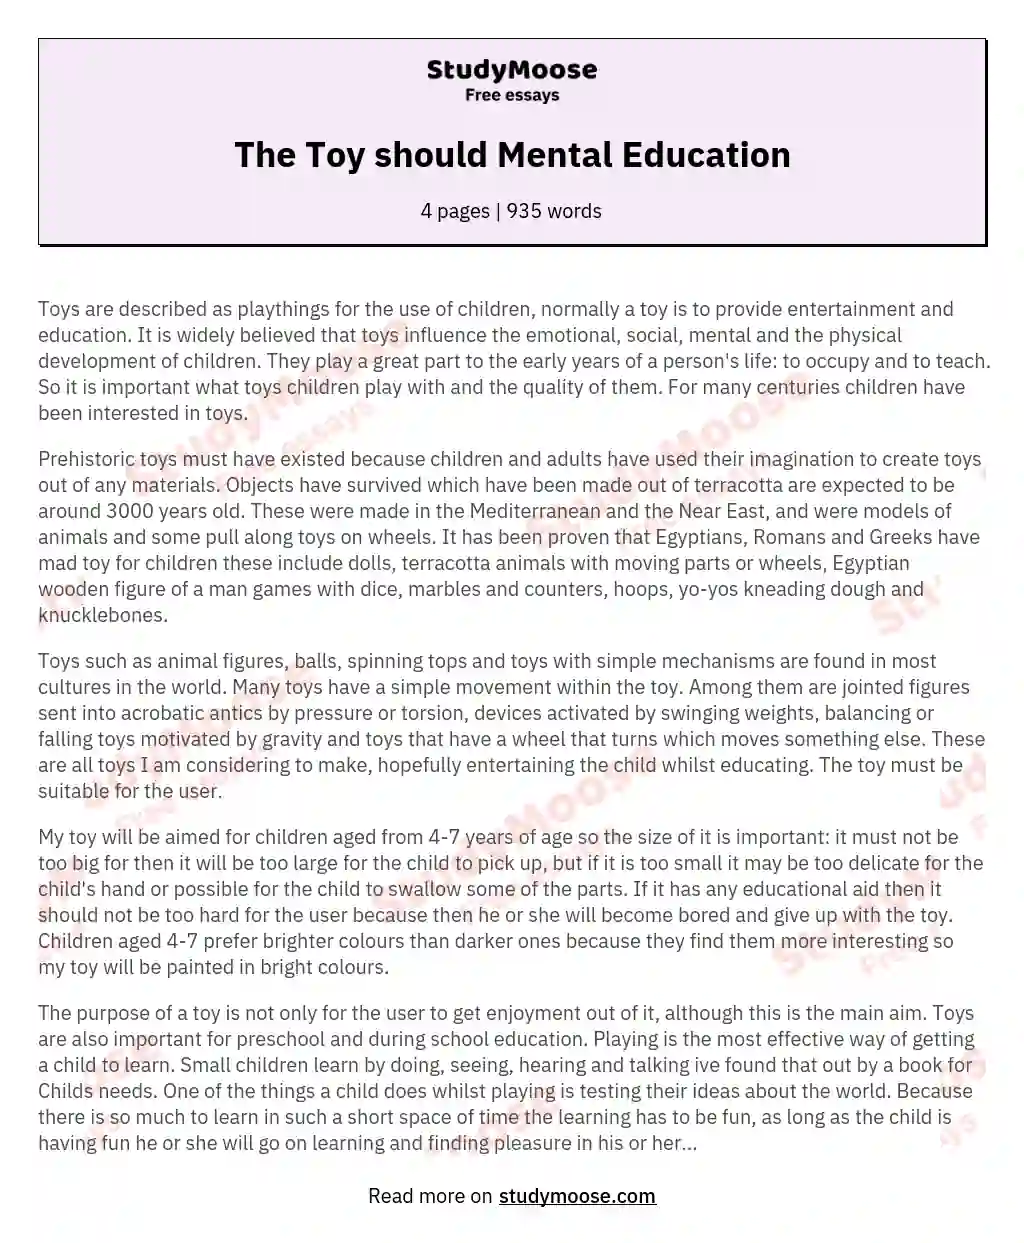 The Toy should Mental Education essay